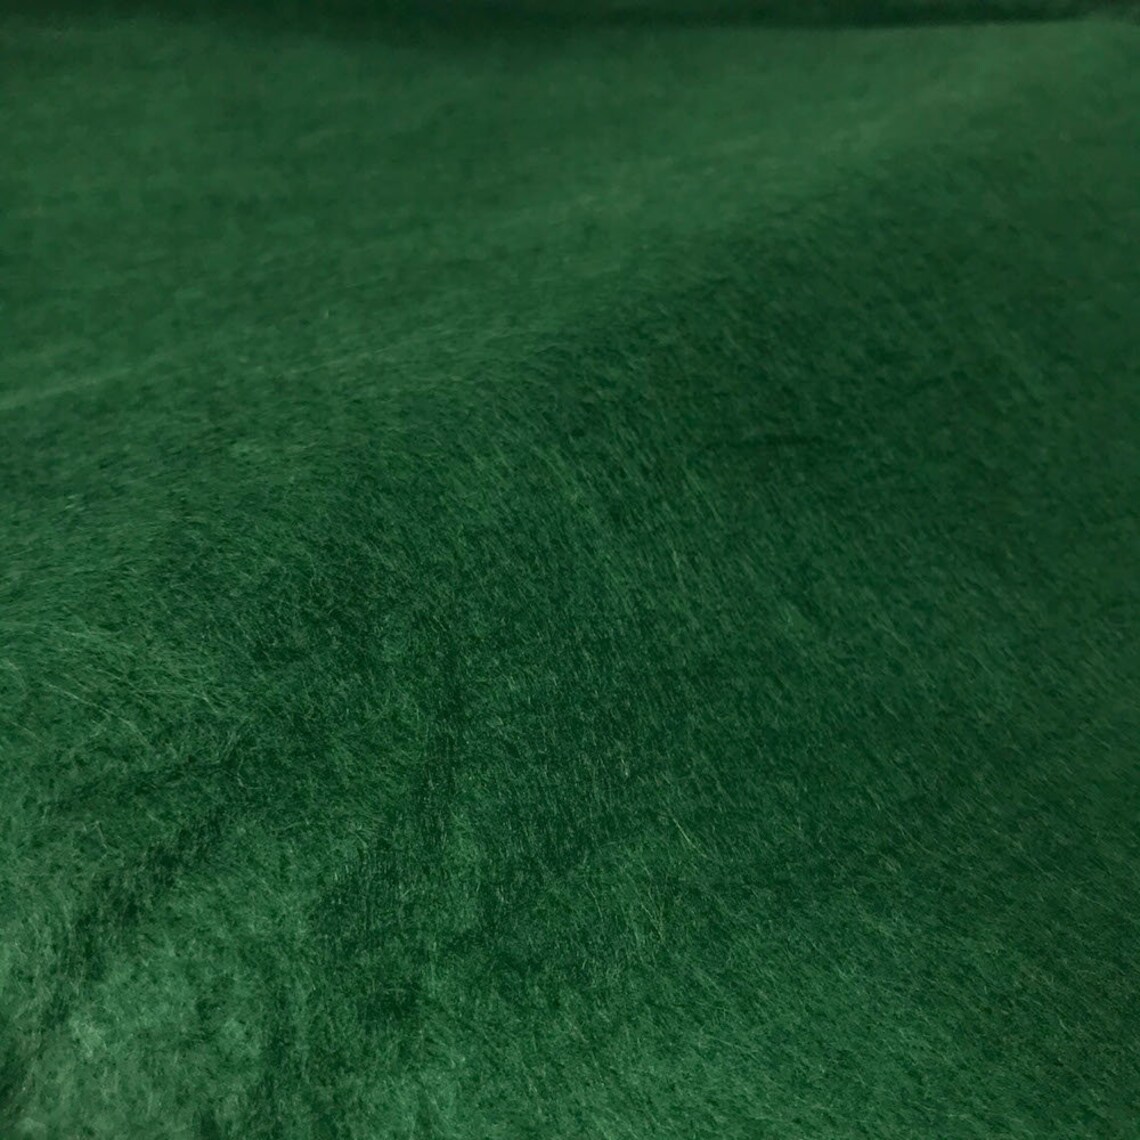 Hunter Green Felt Fabric 100% Polyester 72 Inches Wide | Etsy